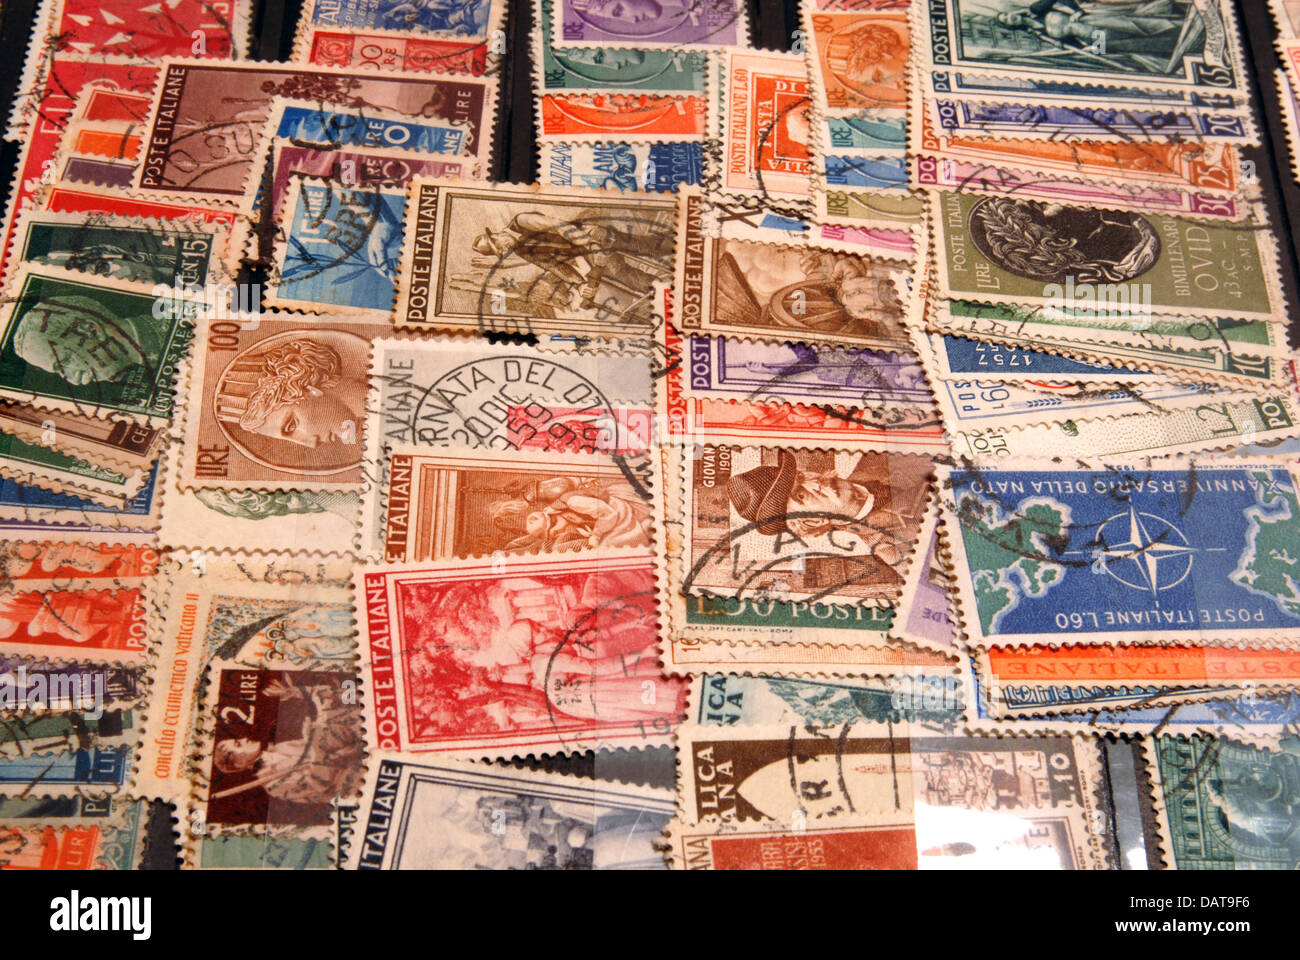 Old stamp collection from Italy Stock Photo